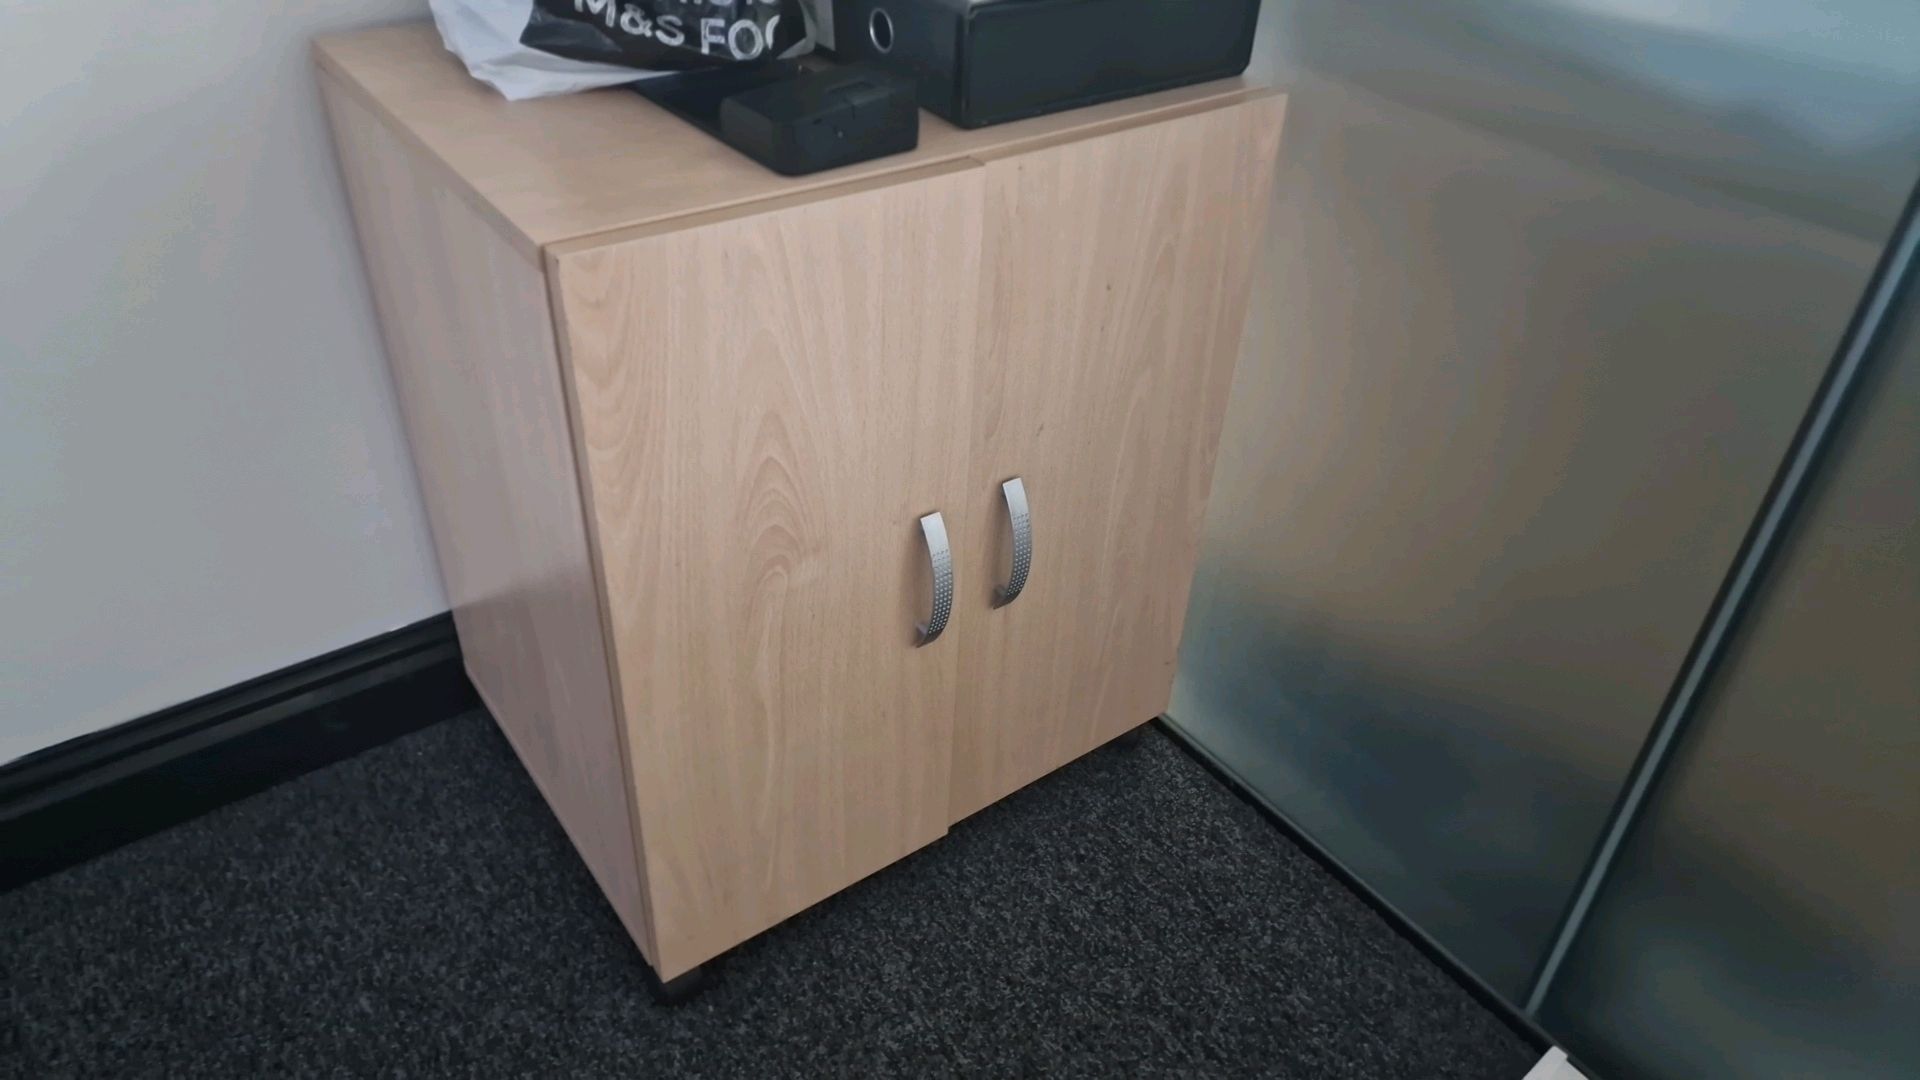 ref 56 - Office Drawer Units x5 - Image 5 of 5